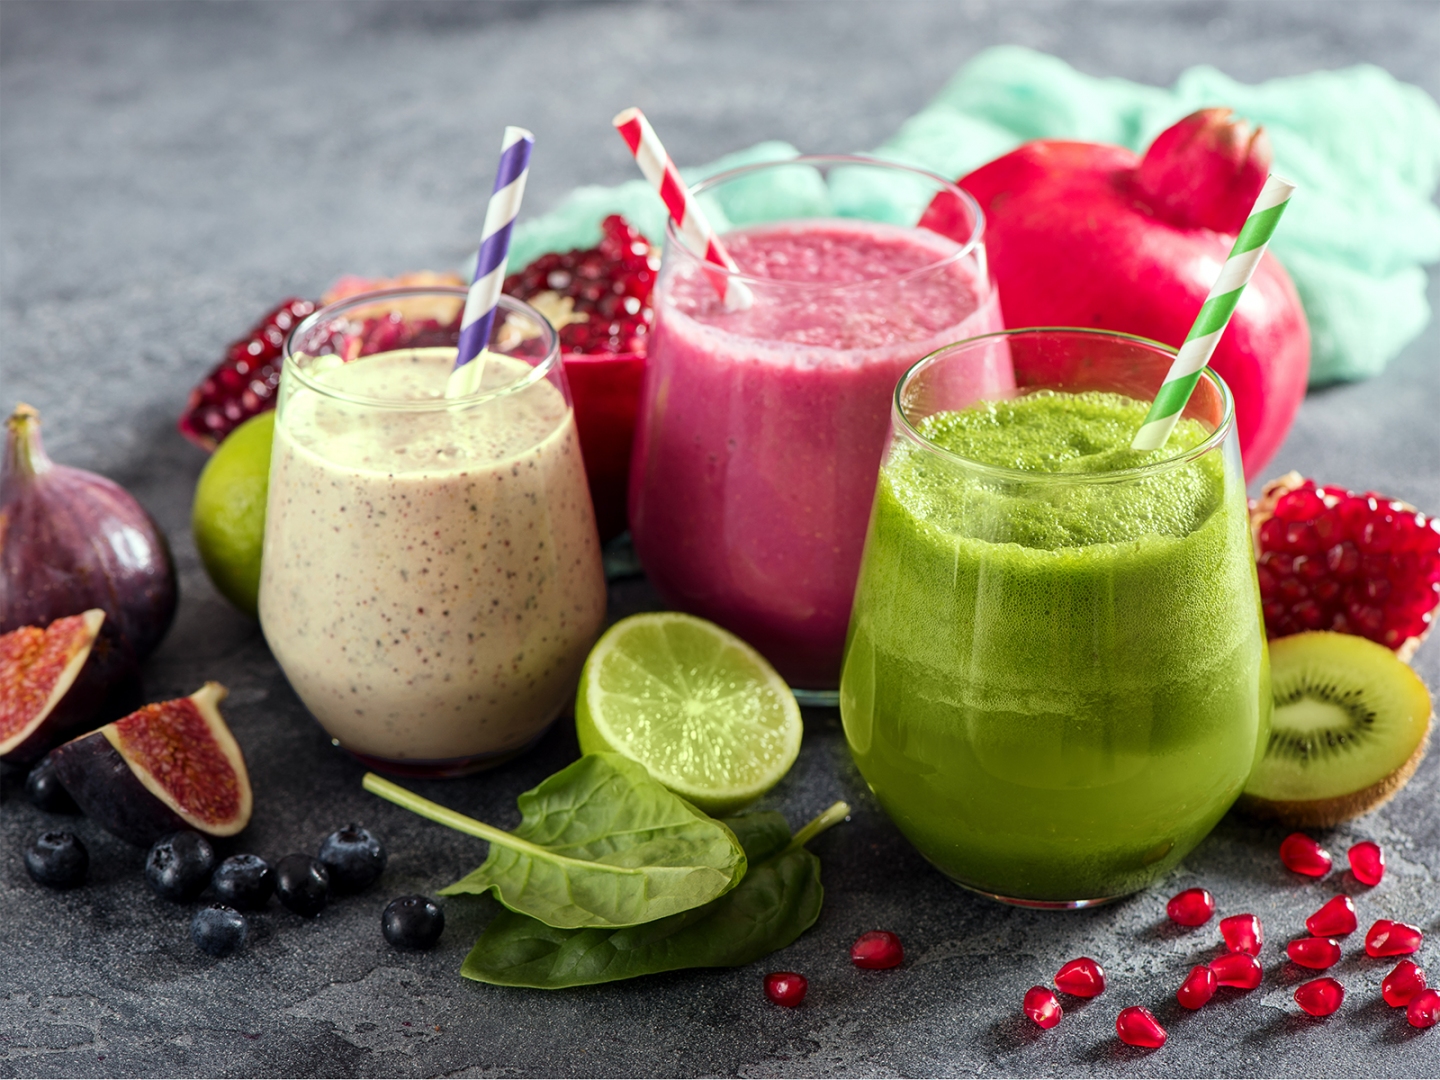 000smoothies-1600x1200.png